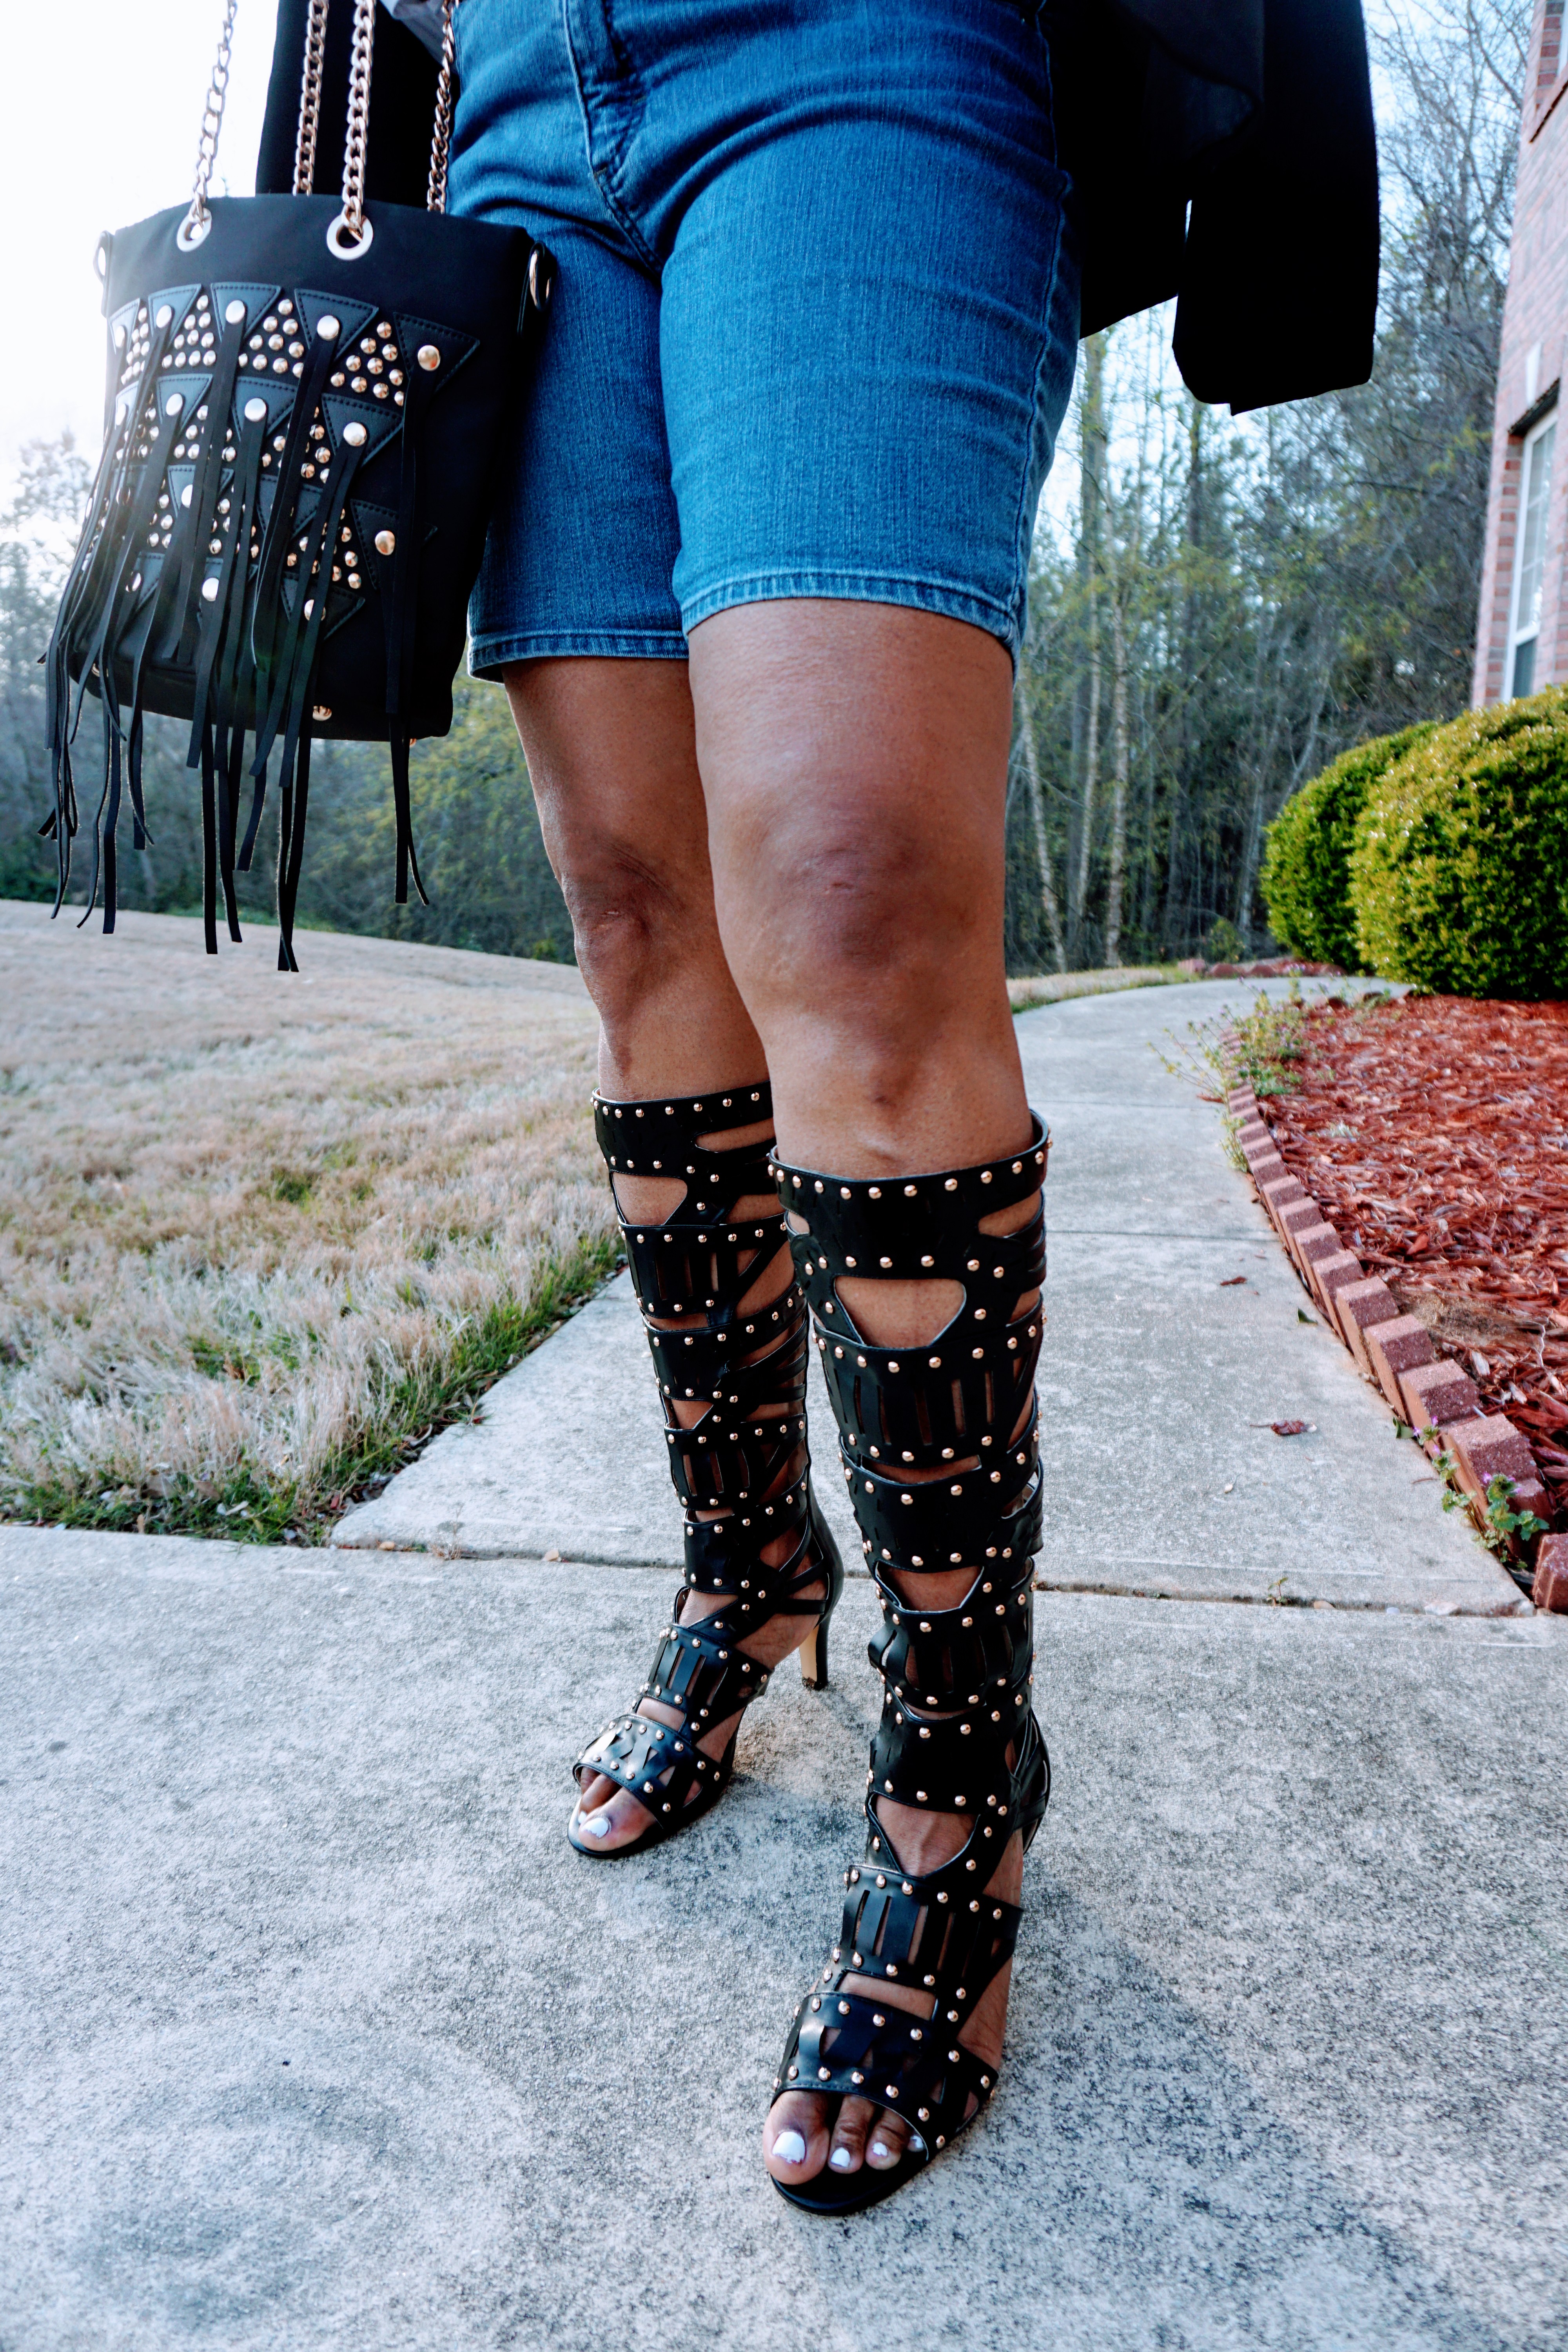 Lower half of a woman in tall black studded boots, and carrying a matching black studded and fringed bag.